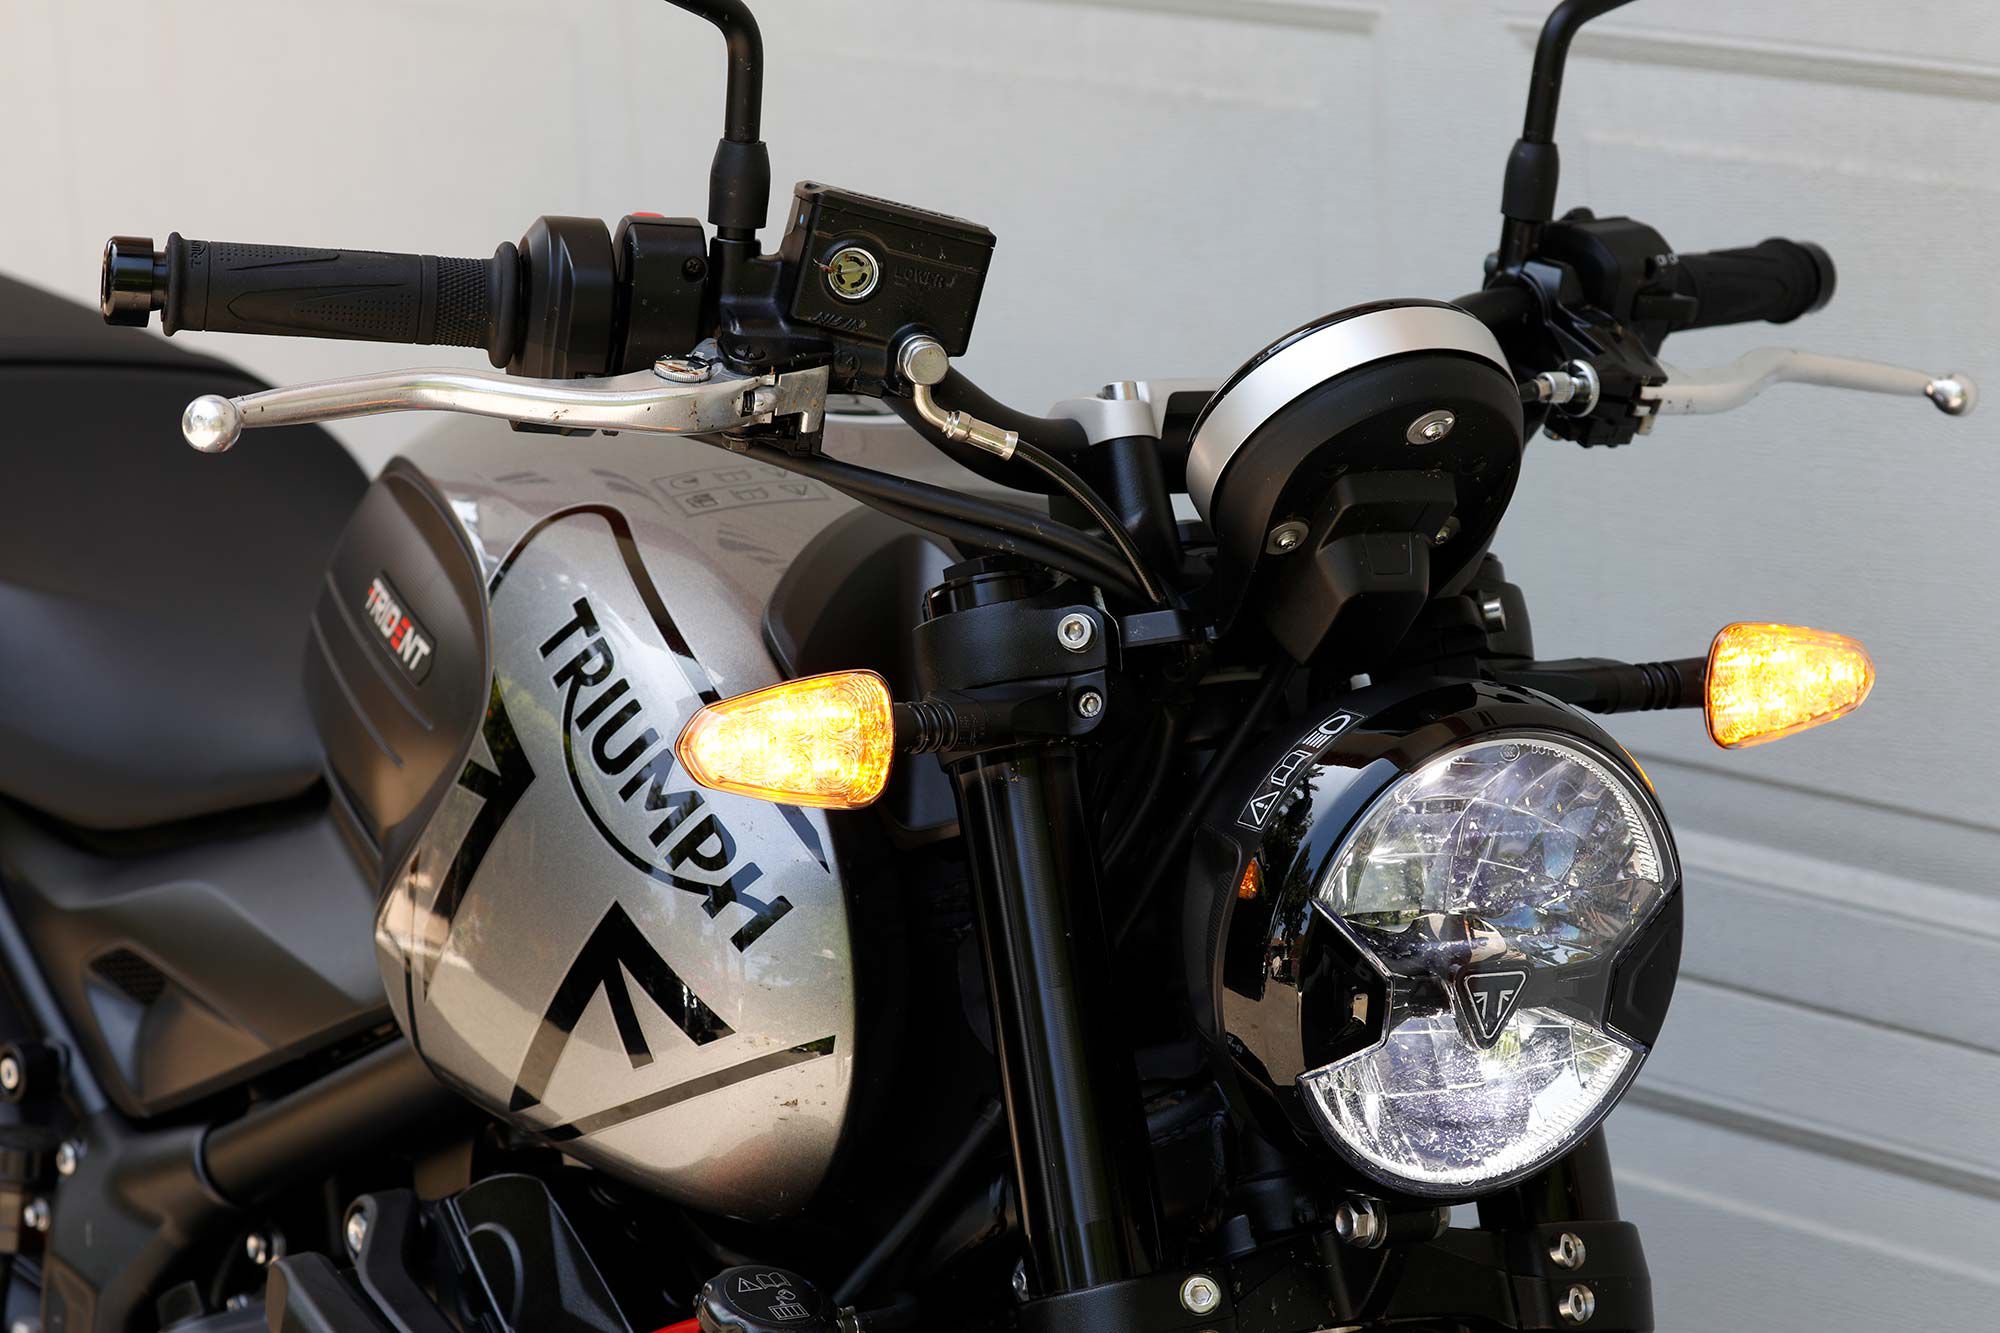 Crisp LED lighting helps the Trident rider stand out on the road.